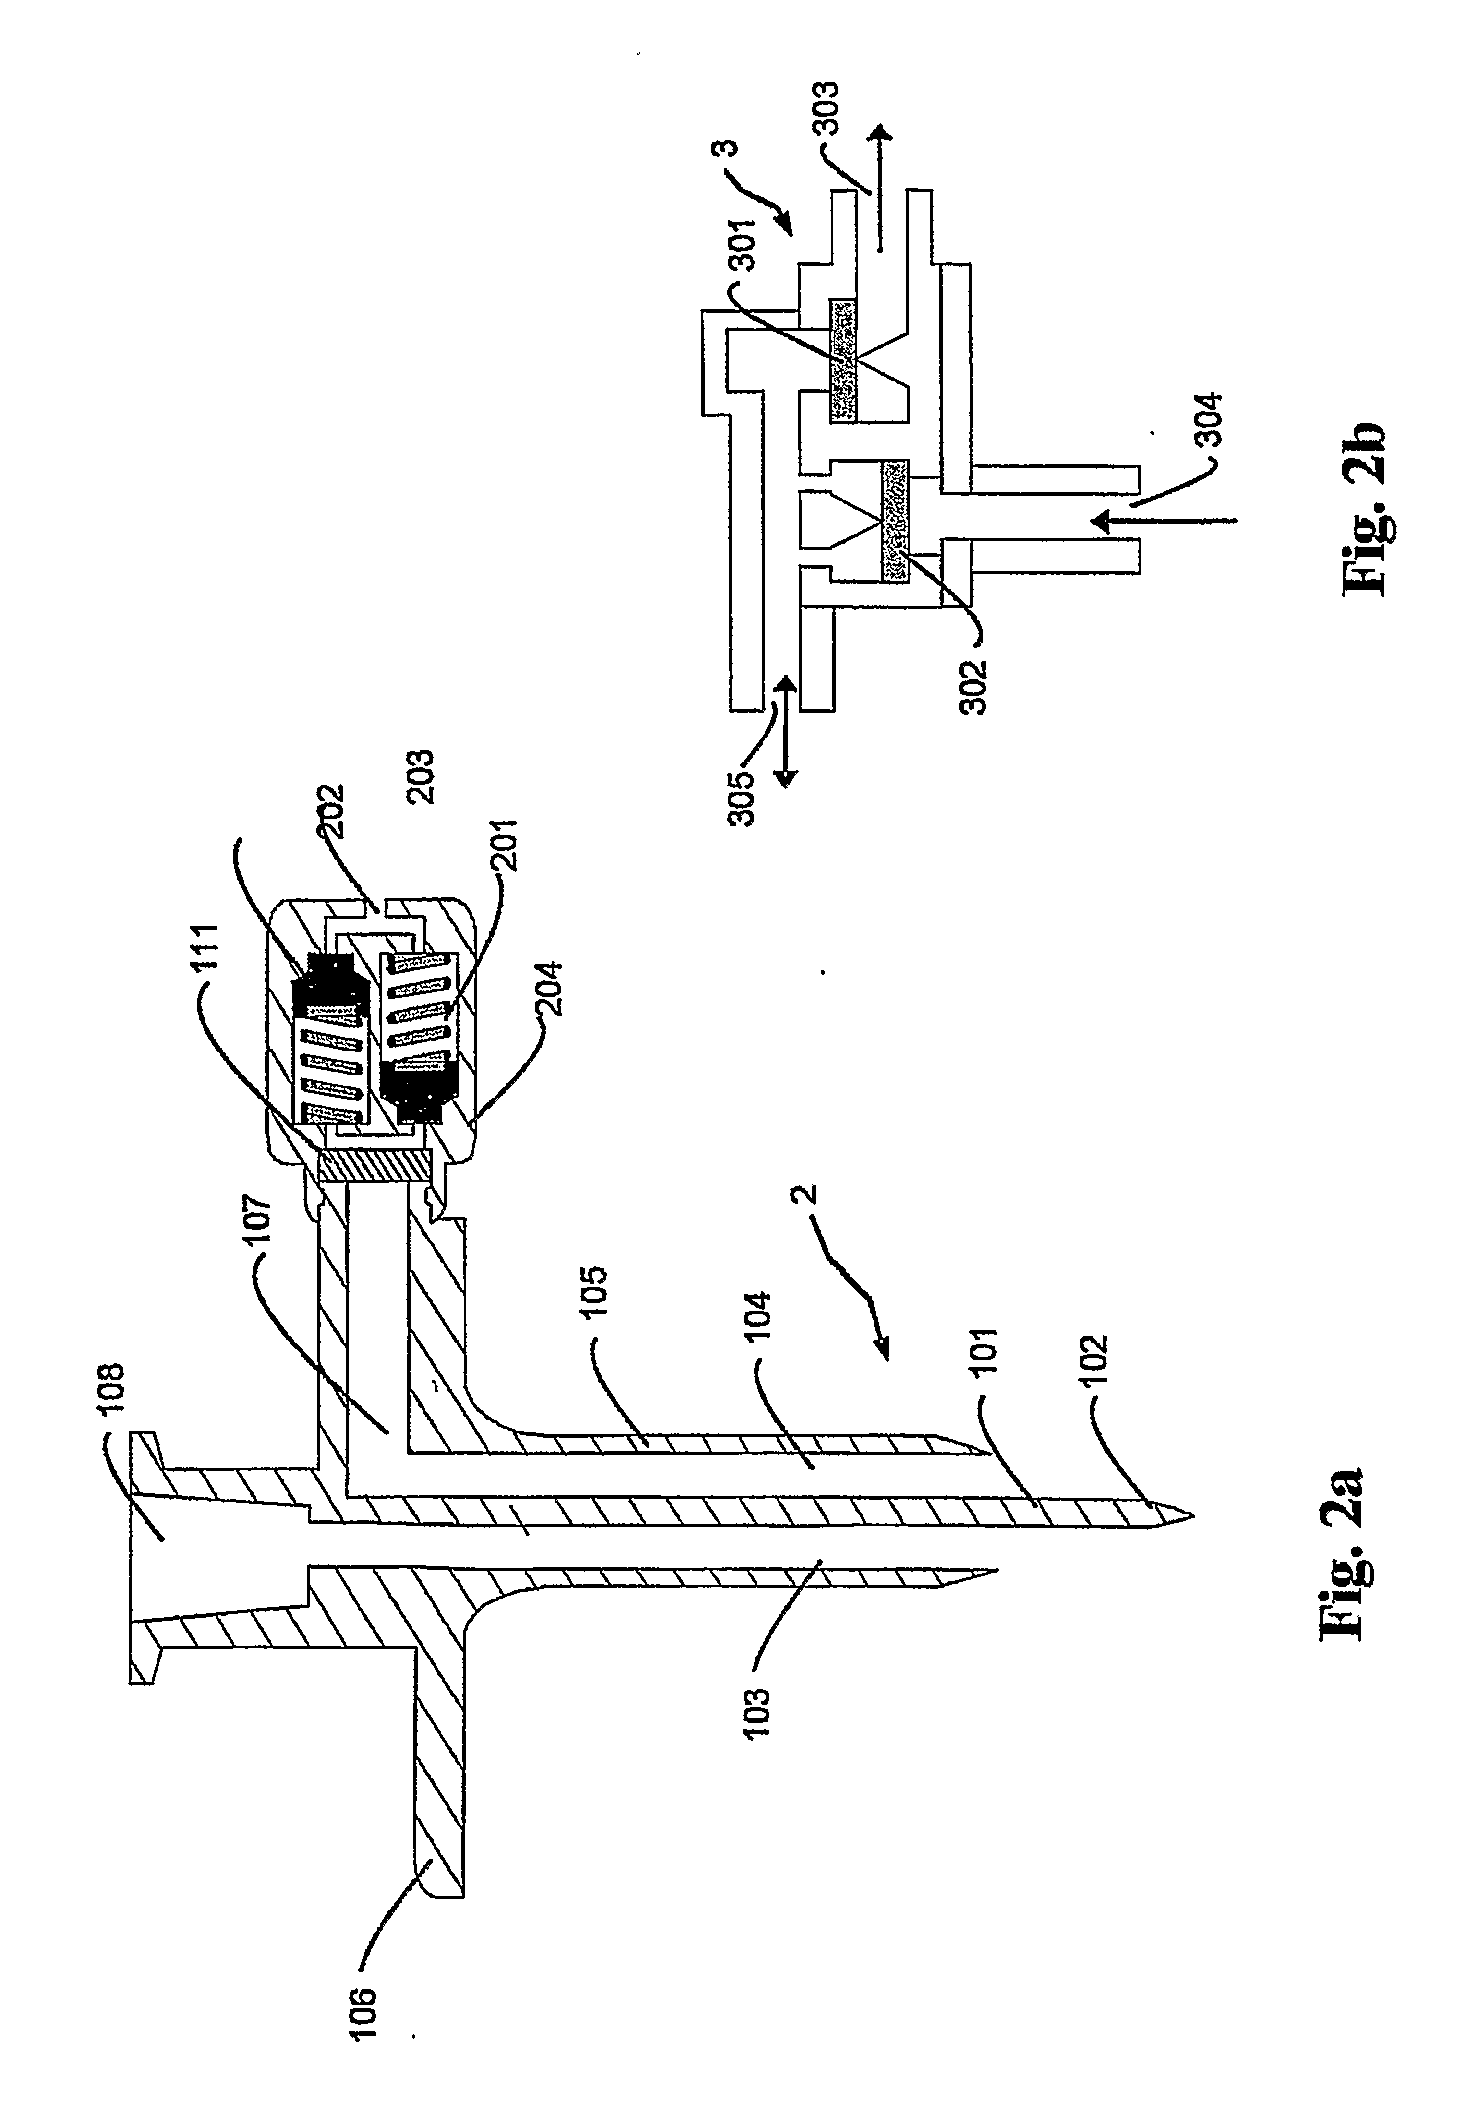 Liquid Transfer Device for Medical Dispensing Containers